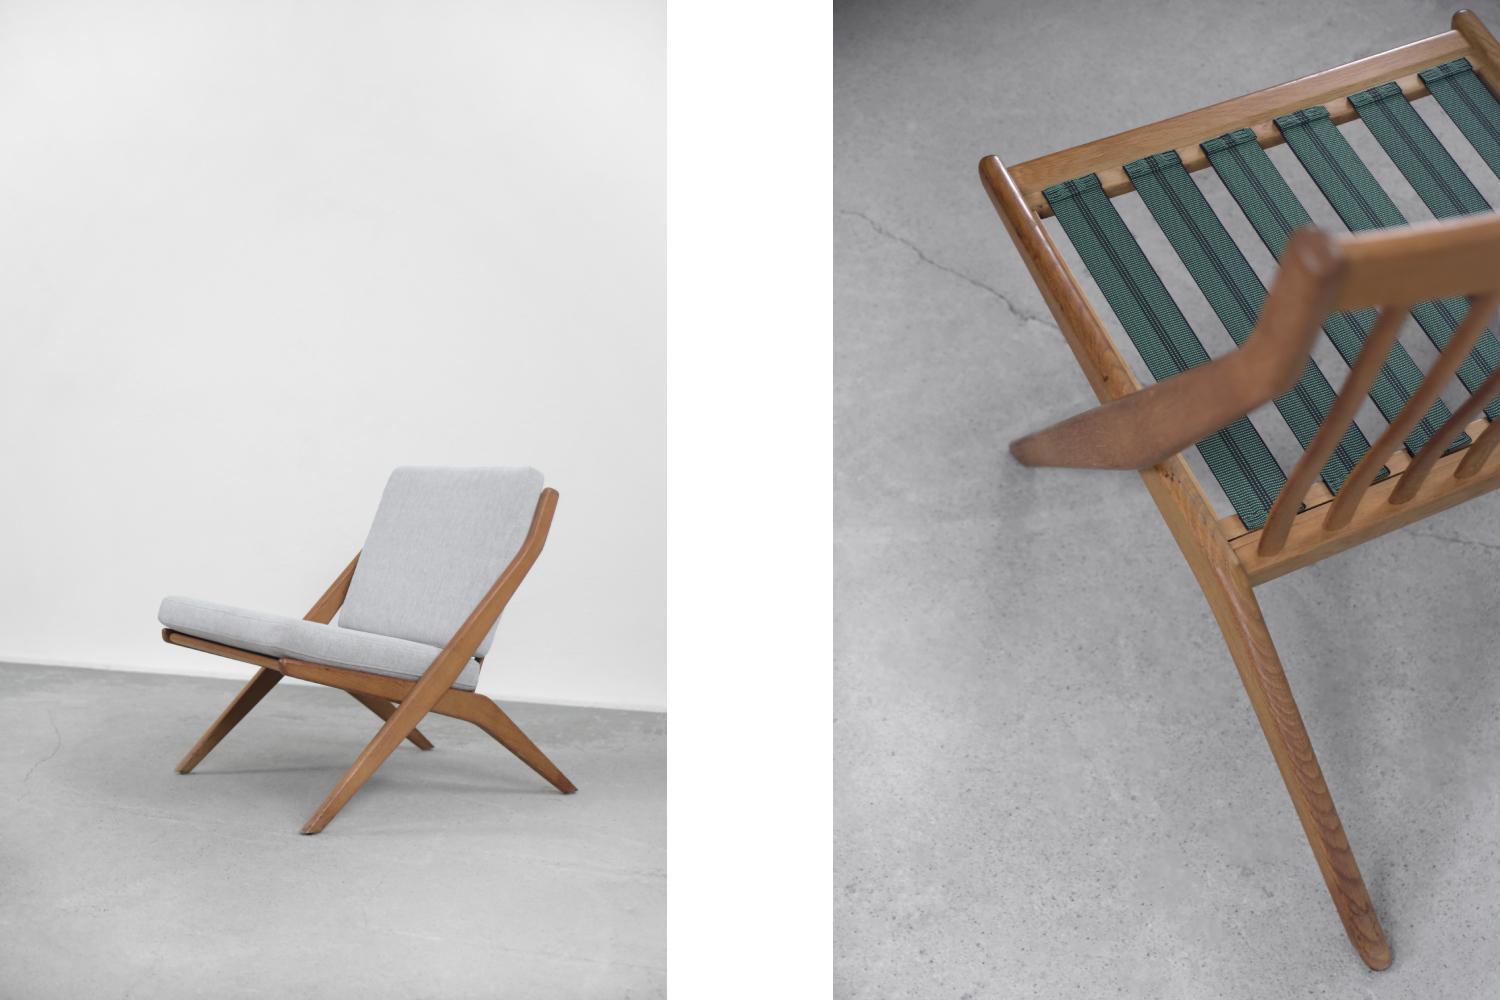 Fabric Pair of Mid-Century Modern Swedish Scissor Chairs by Folke Ohlsson for Bodafors For Sale